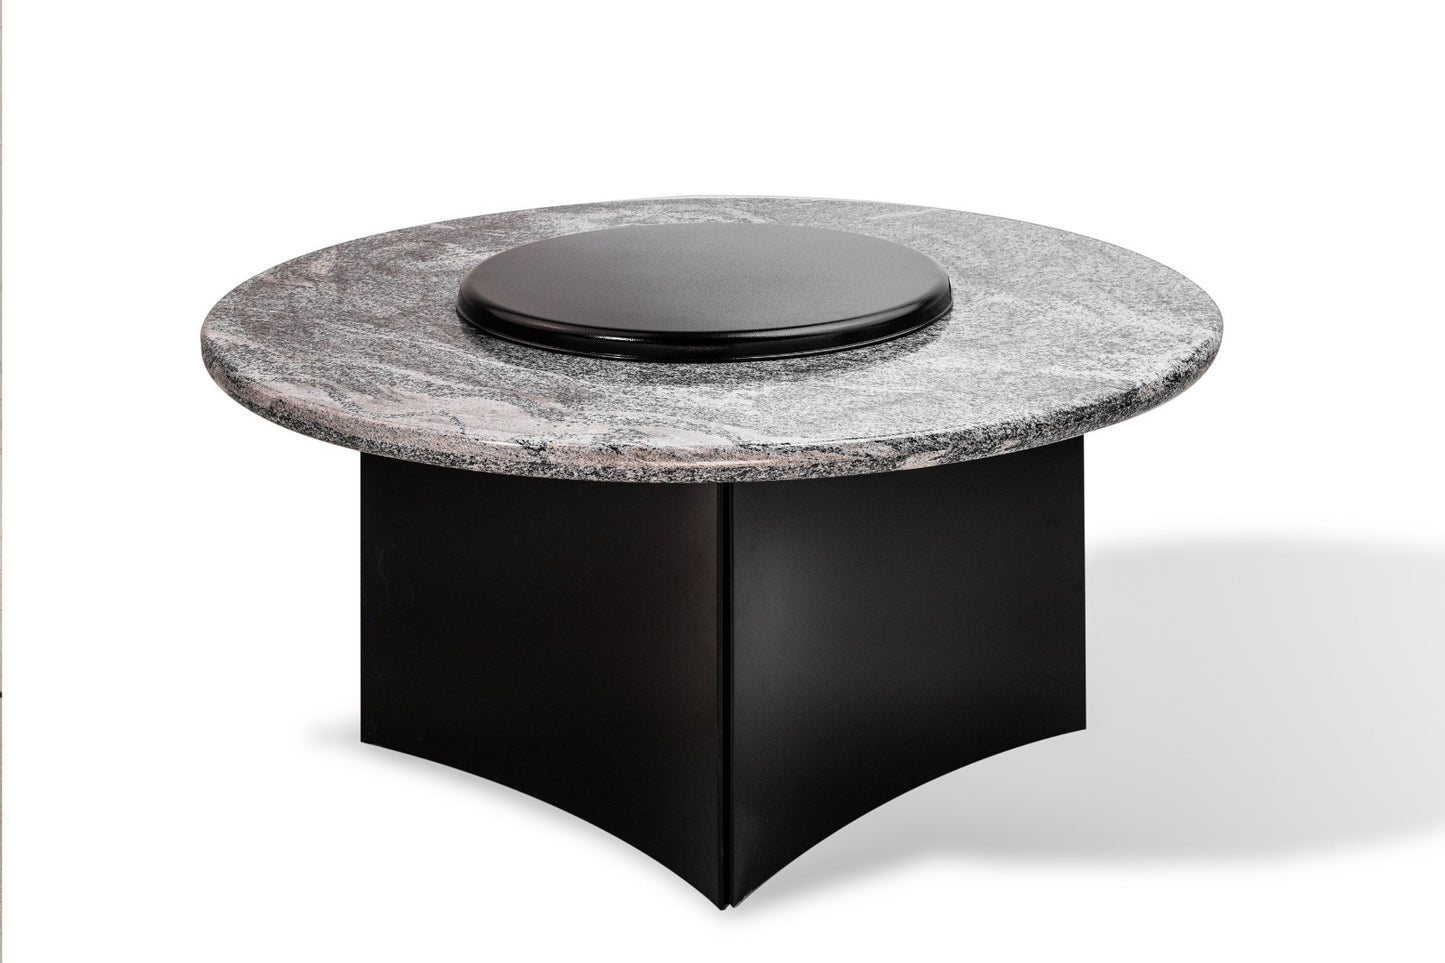 Silver Tiger Oriflamme Fire Table with optional Flat Lid